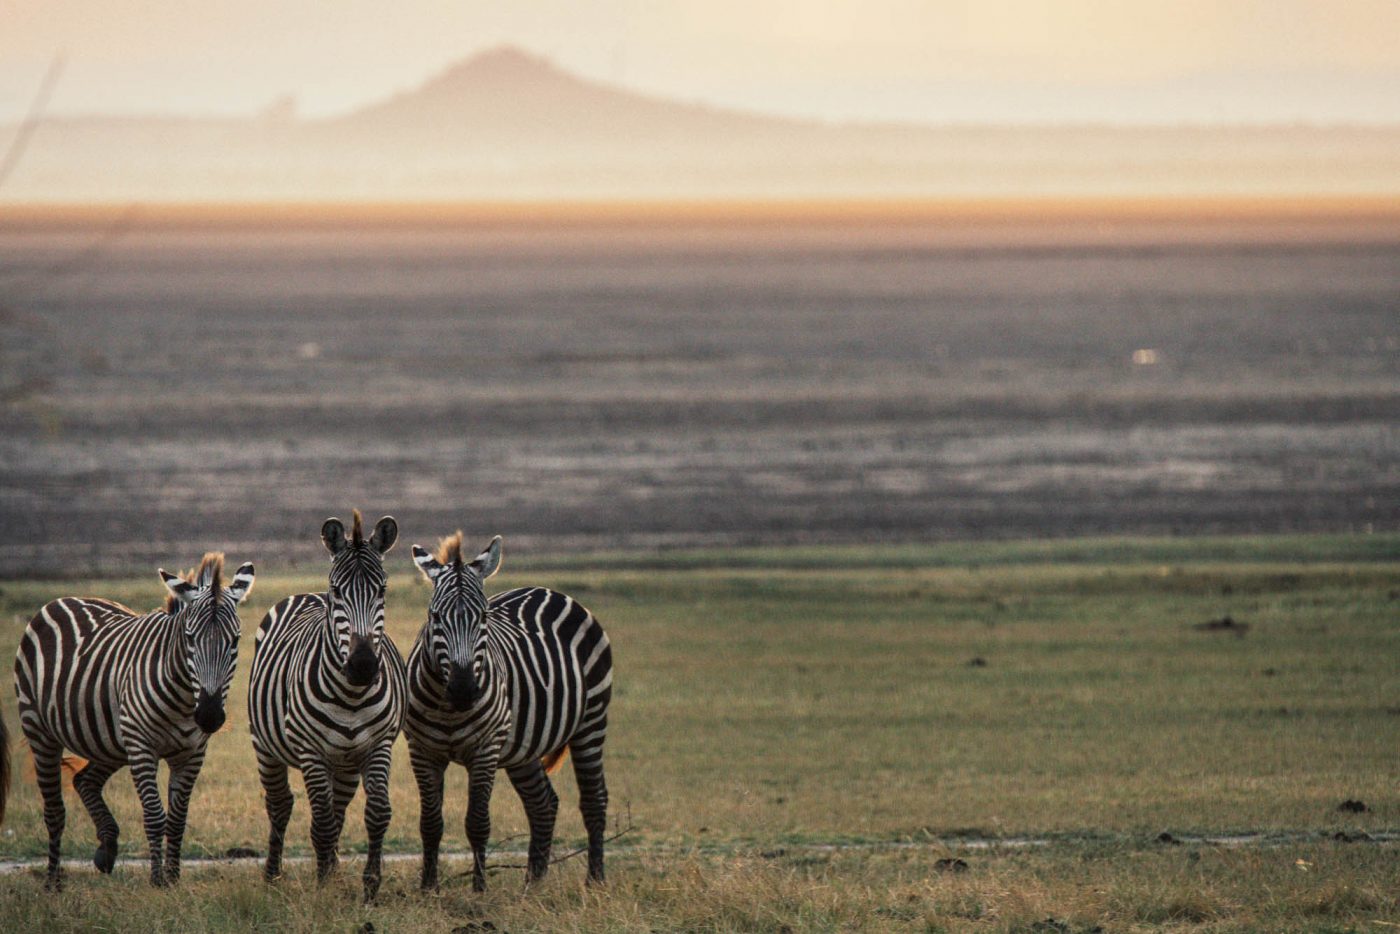 East Africa Bucket List: 9 Highlights and Amazing Experiences to Have in East Africa